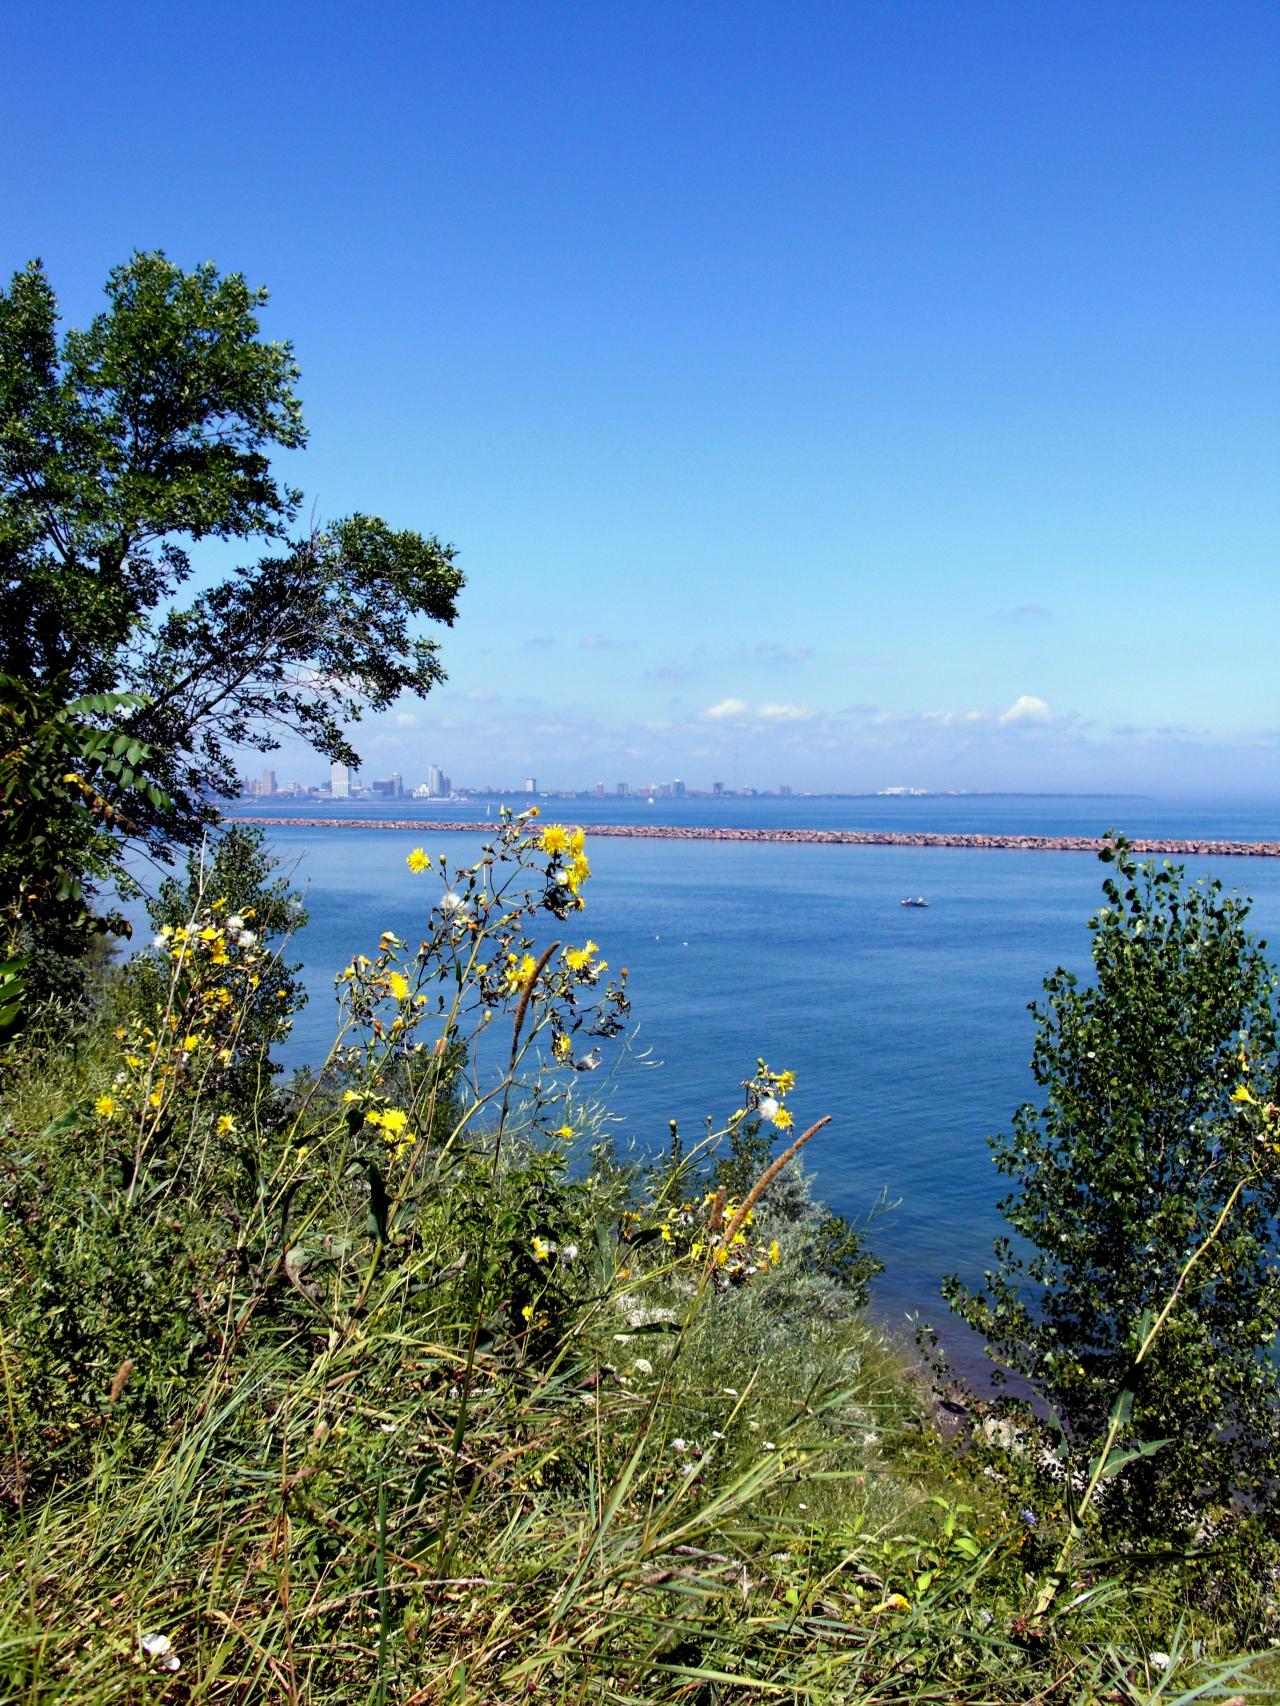 Free photo: Milwaukee Bluffs - tree, trees, water - Non-Commercial ...